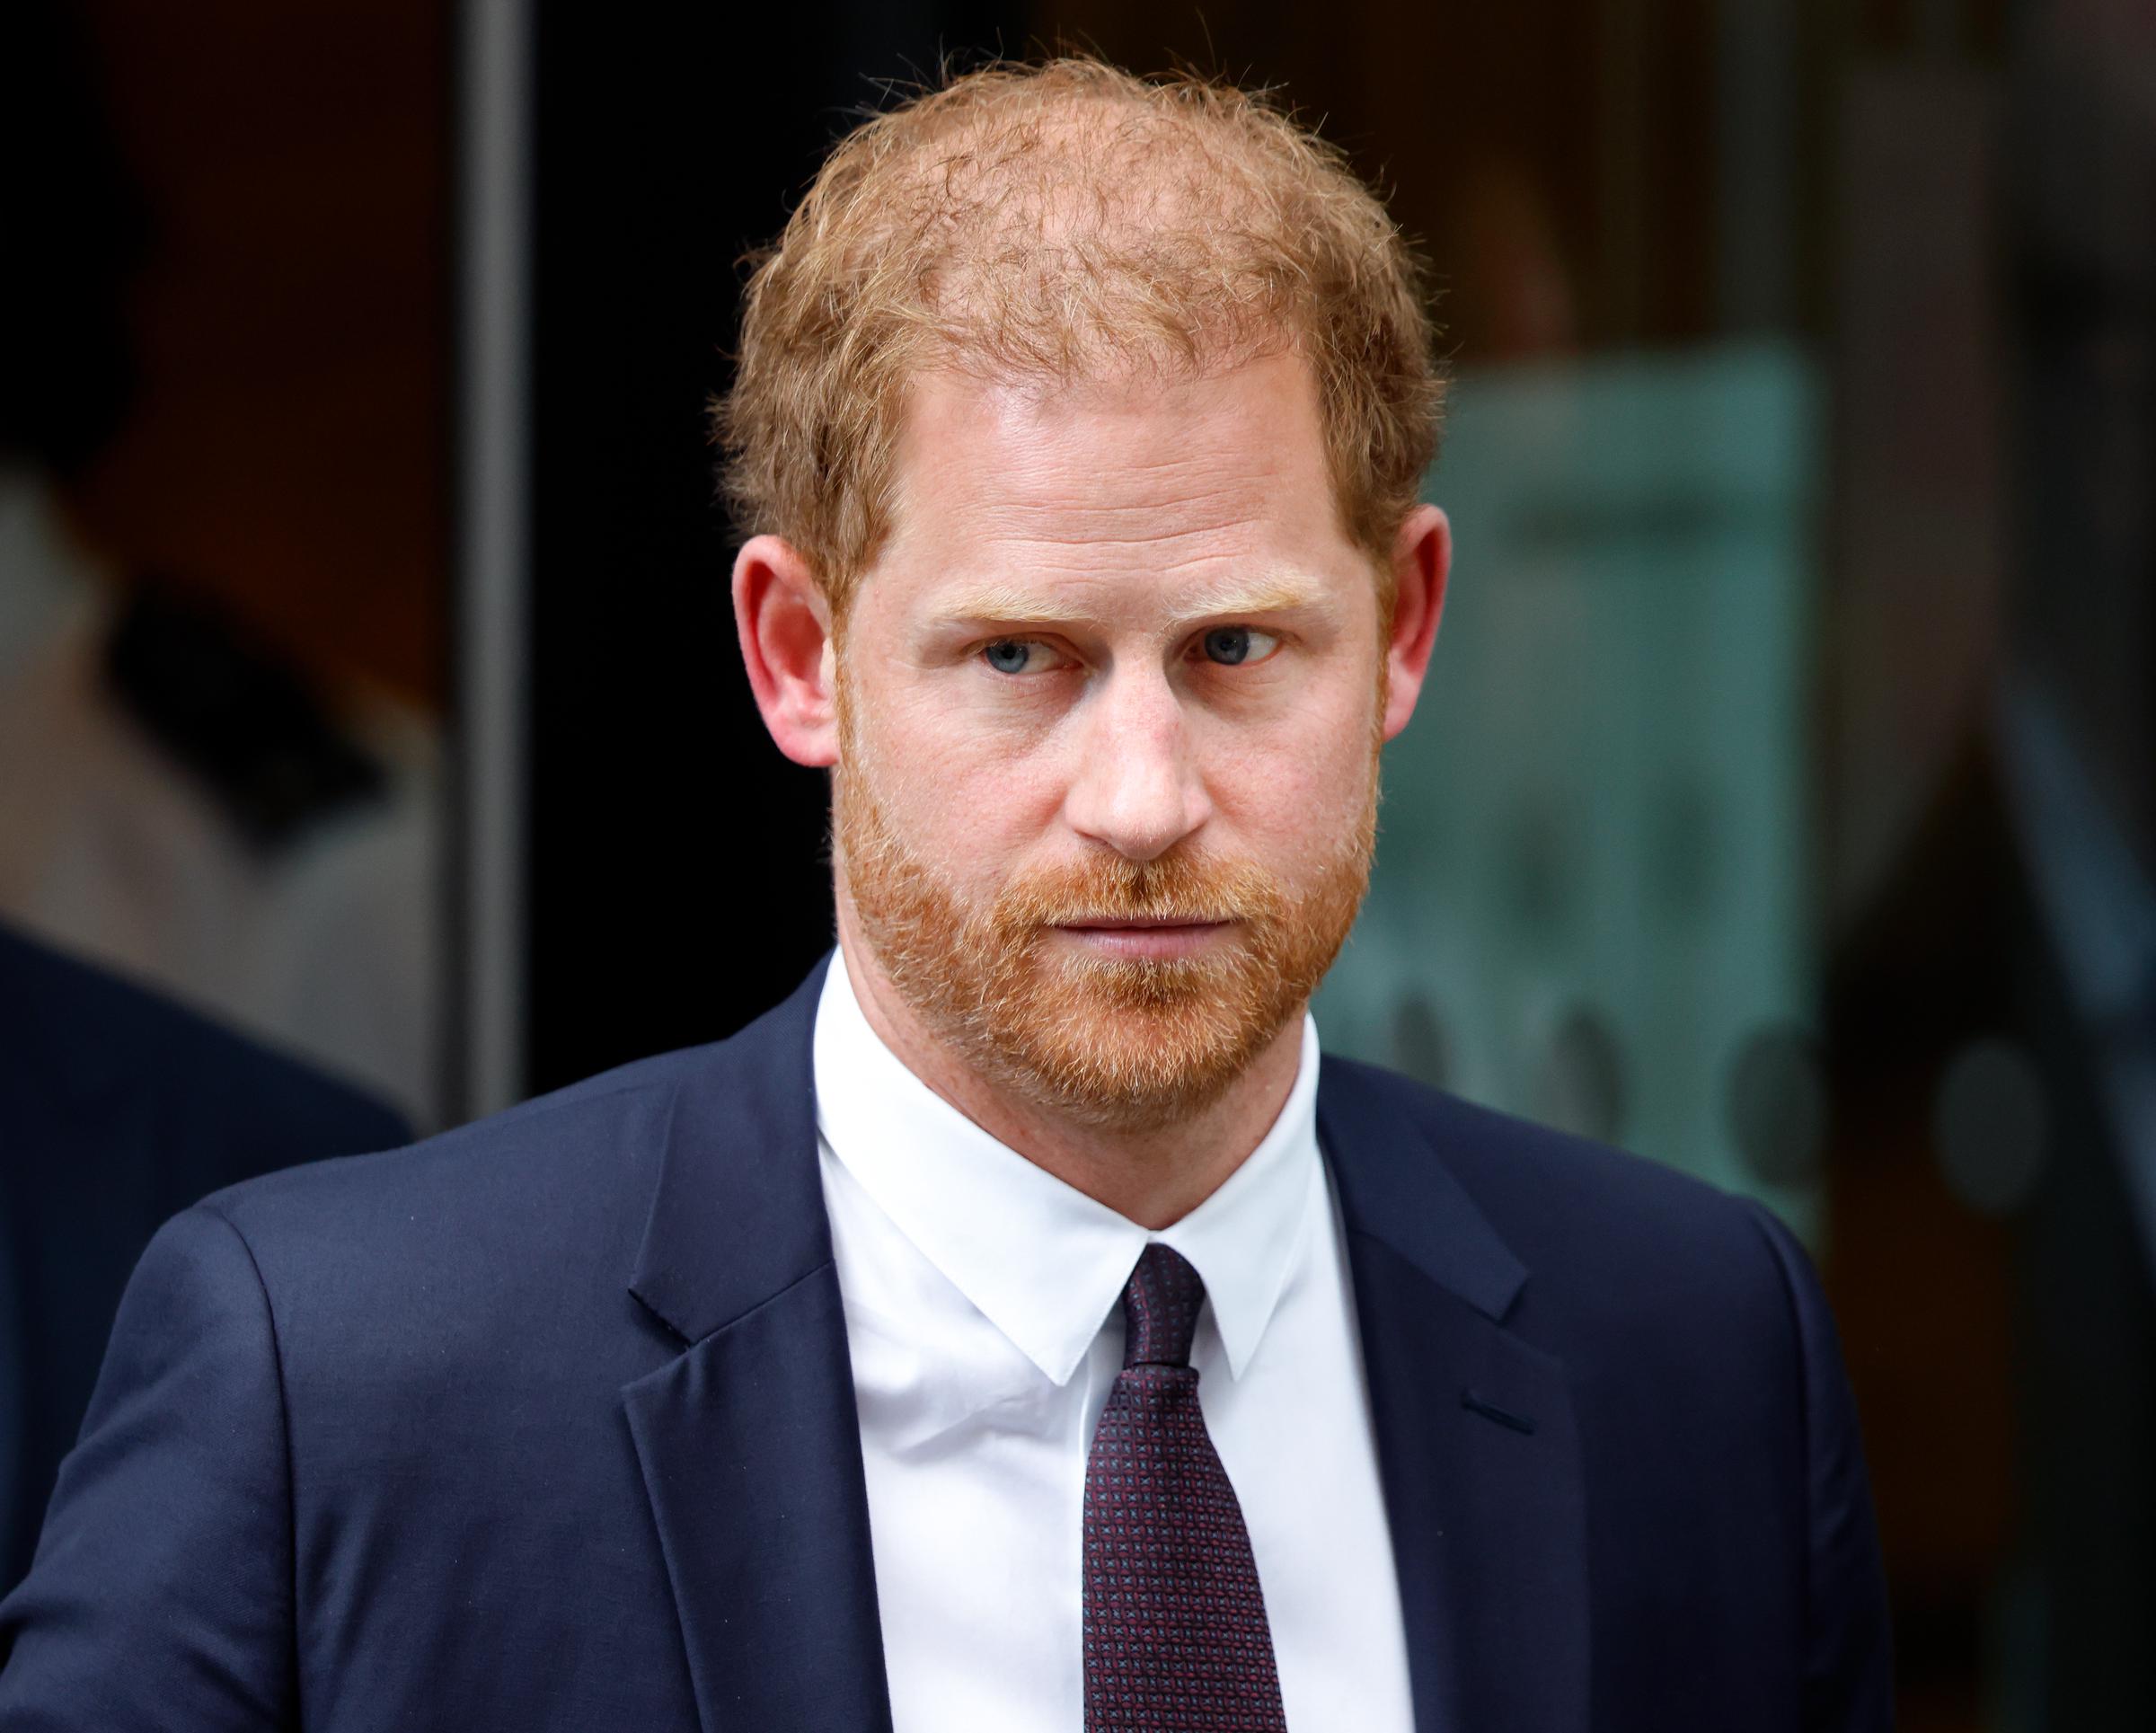 Prince Harry departs the Rolls Building of the High Court after giving evidence during the Mirror Group phone hacking trial on June 6, 2023, in London, England. | Source: Getty Images